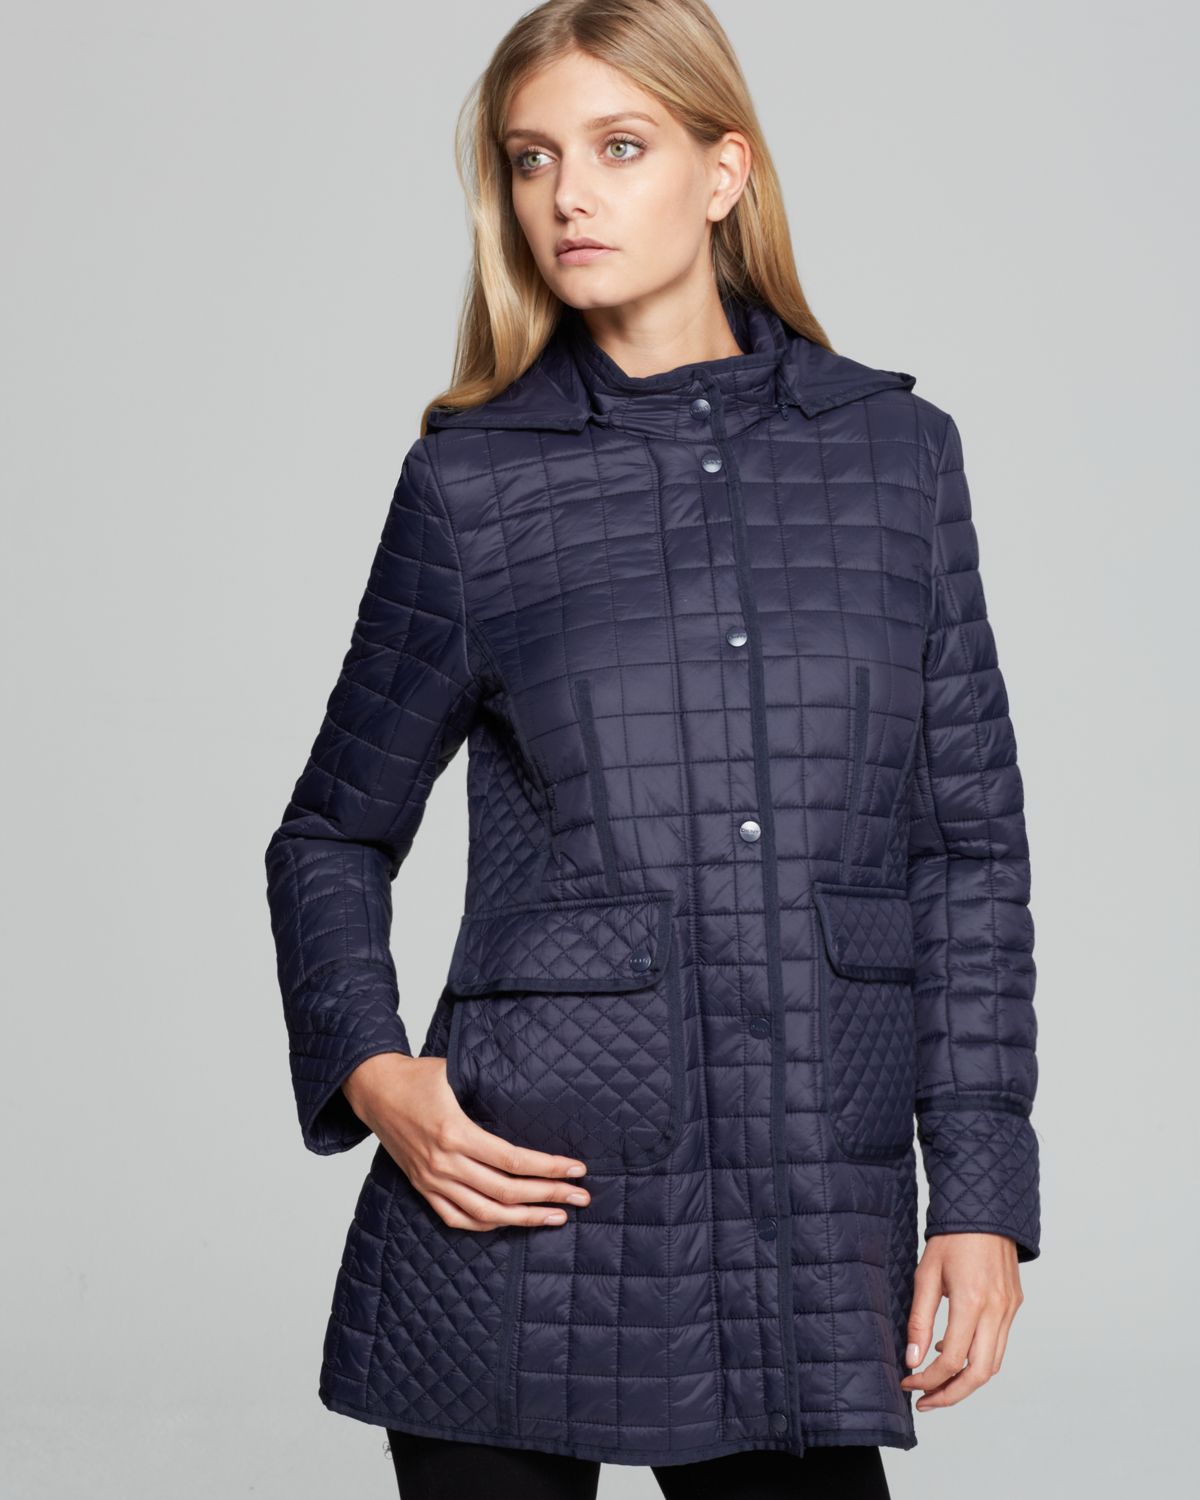 Lyst - Dkny Contrast Quilted Hooded Jacket in Blue